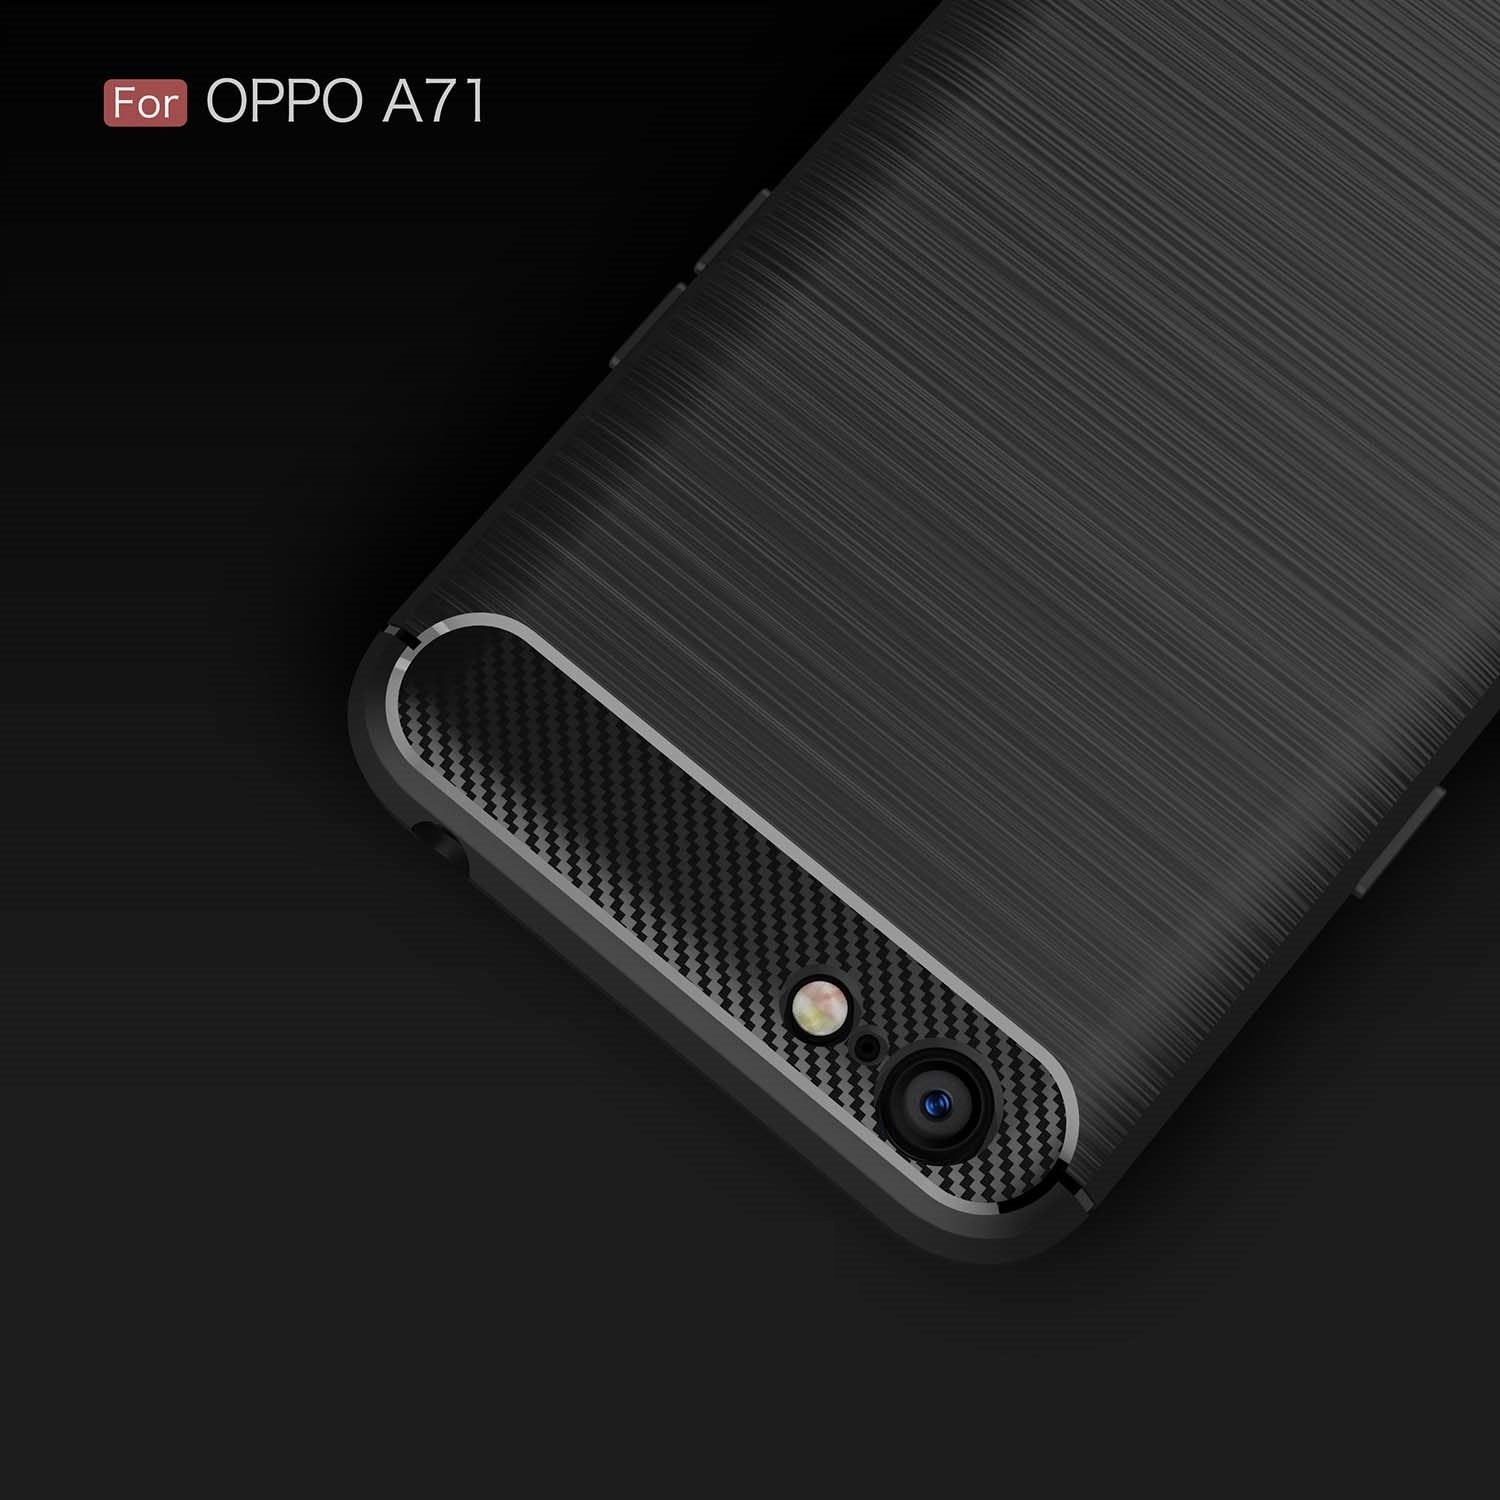 Oppo A71 Brushed Carbon Fiber Design Case - Happiness Idea